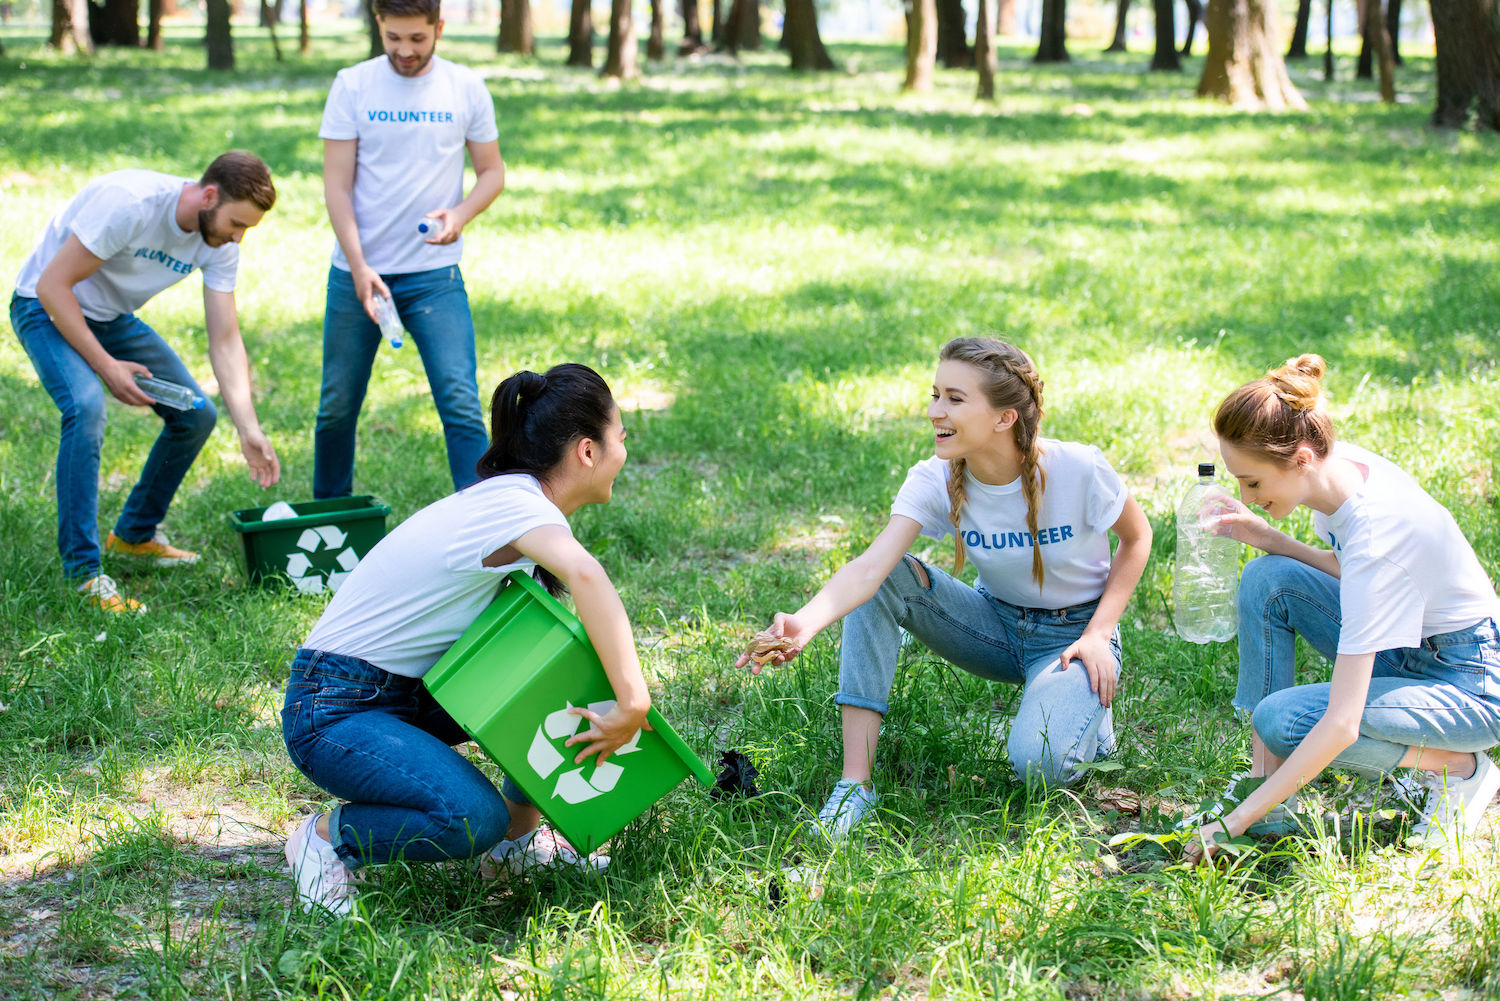 young volunteers with recycling boxes cleaning lawn in park